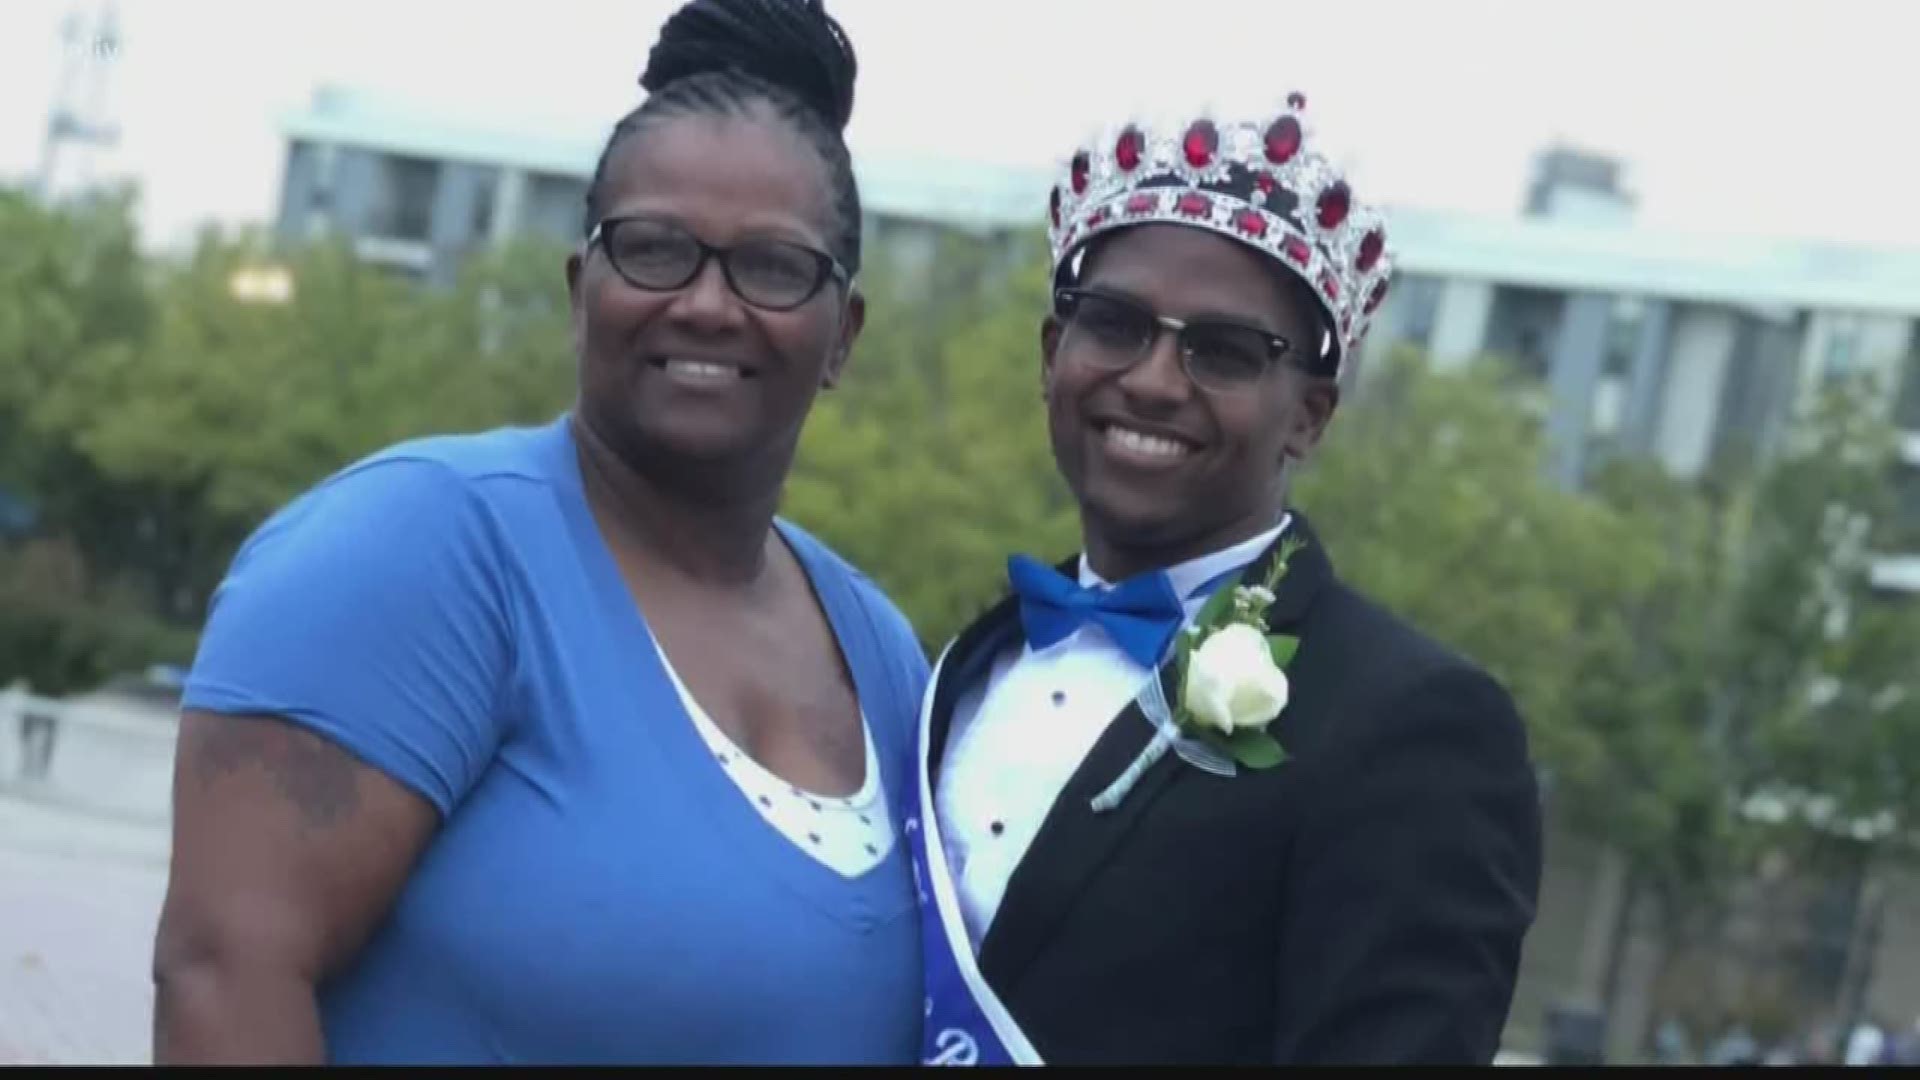 Demarco Pittman is a sophomore at Georgia State University. He told 11Alive that he is the first black, deaf man to be selected to the school's homecoming court.